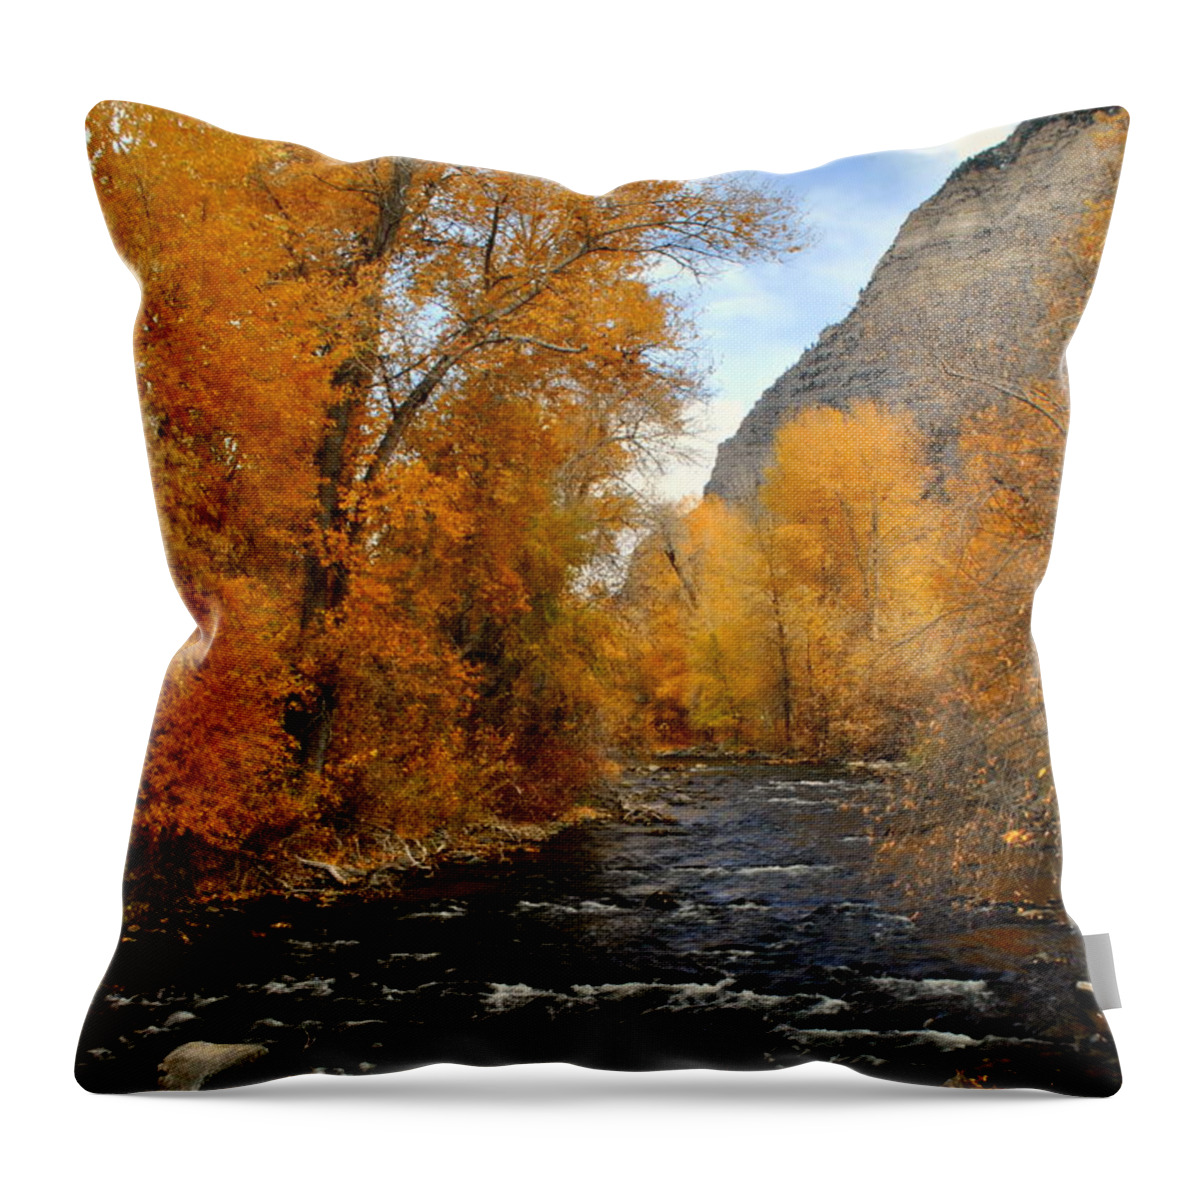 Fall Throw Pillow featuring the photograph Provo River Utah by Nathan Abbott